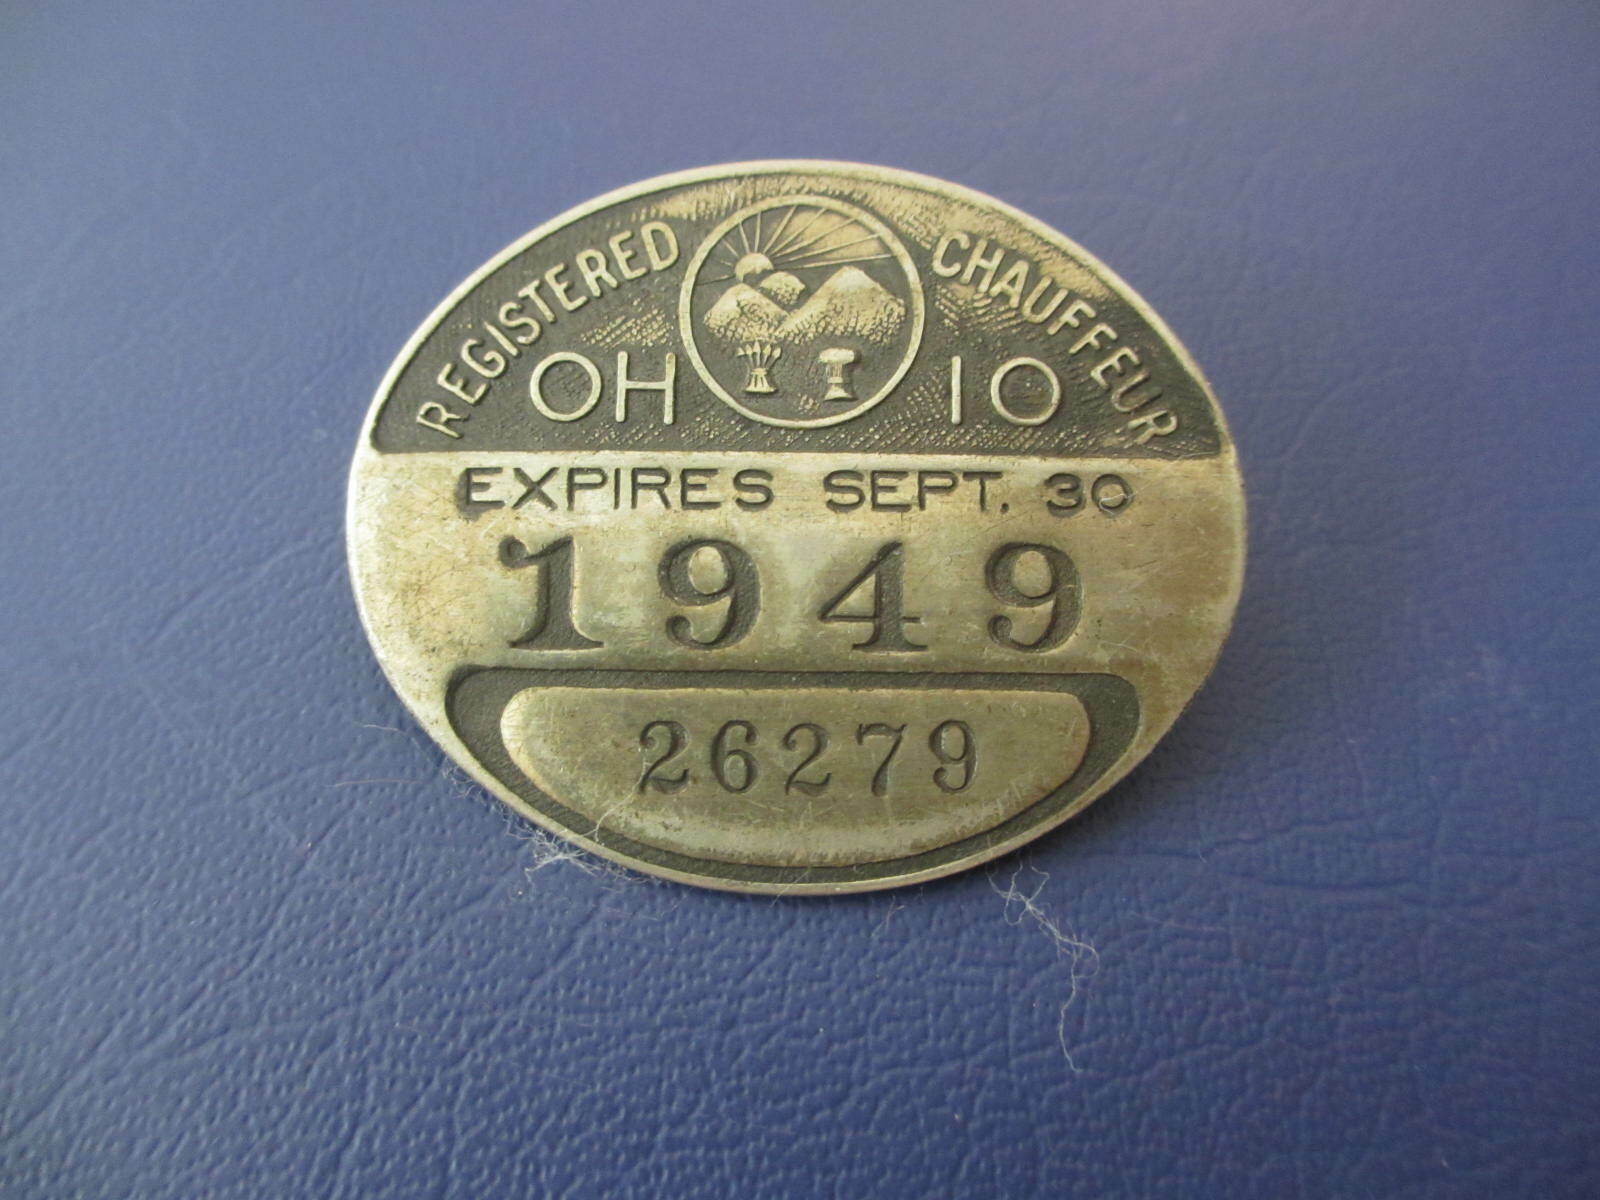 Vintage Chauffeur 1949 Ohio Registered Licensed Badge Pin #26279 Ex. Cond. *